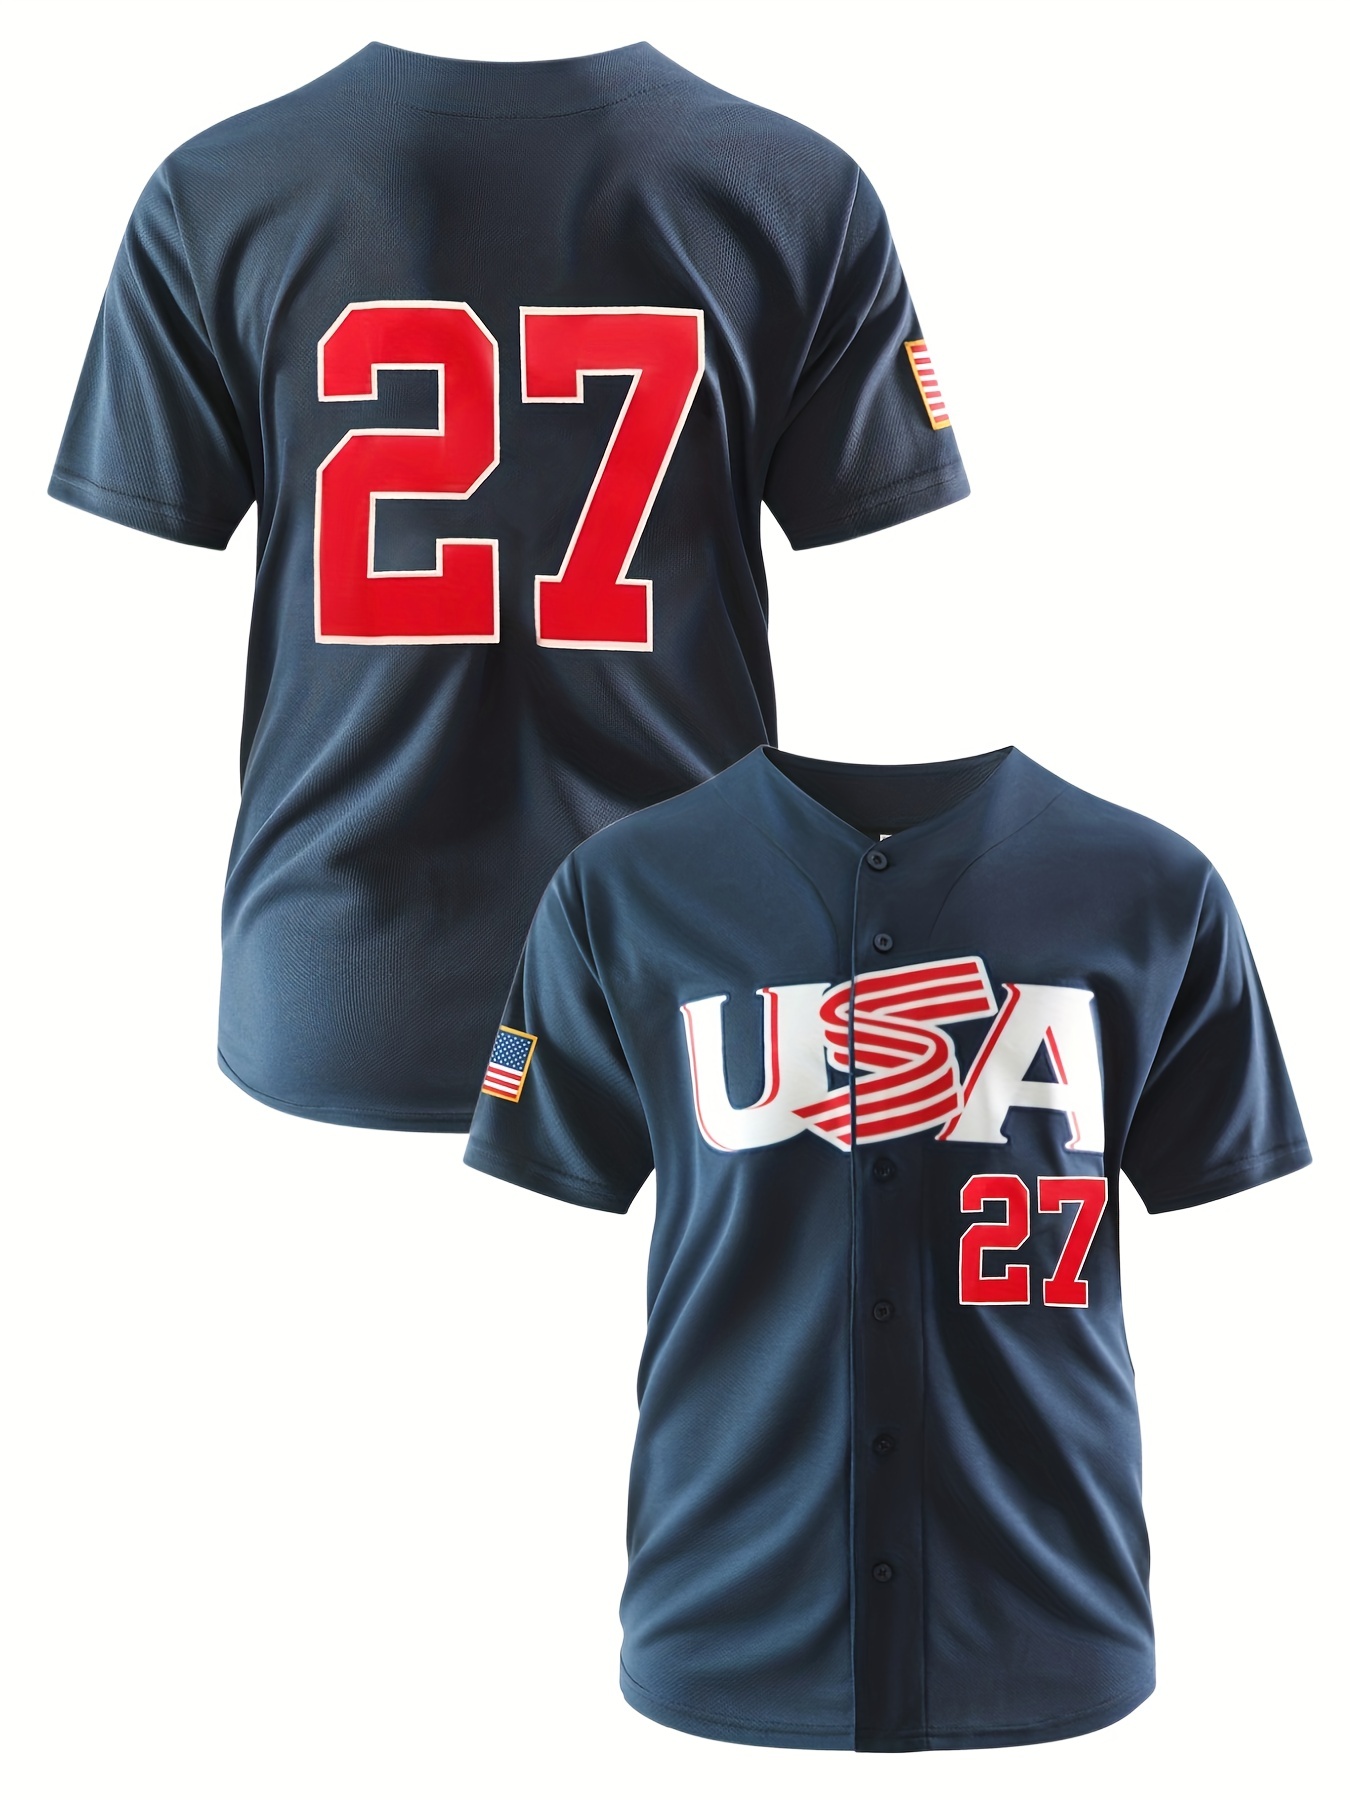 Atlanta Braves Two-Button Jersey - Big & Tall, Best Price and Reviews